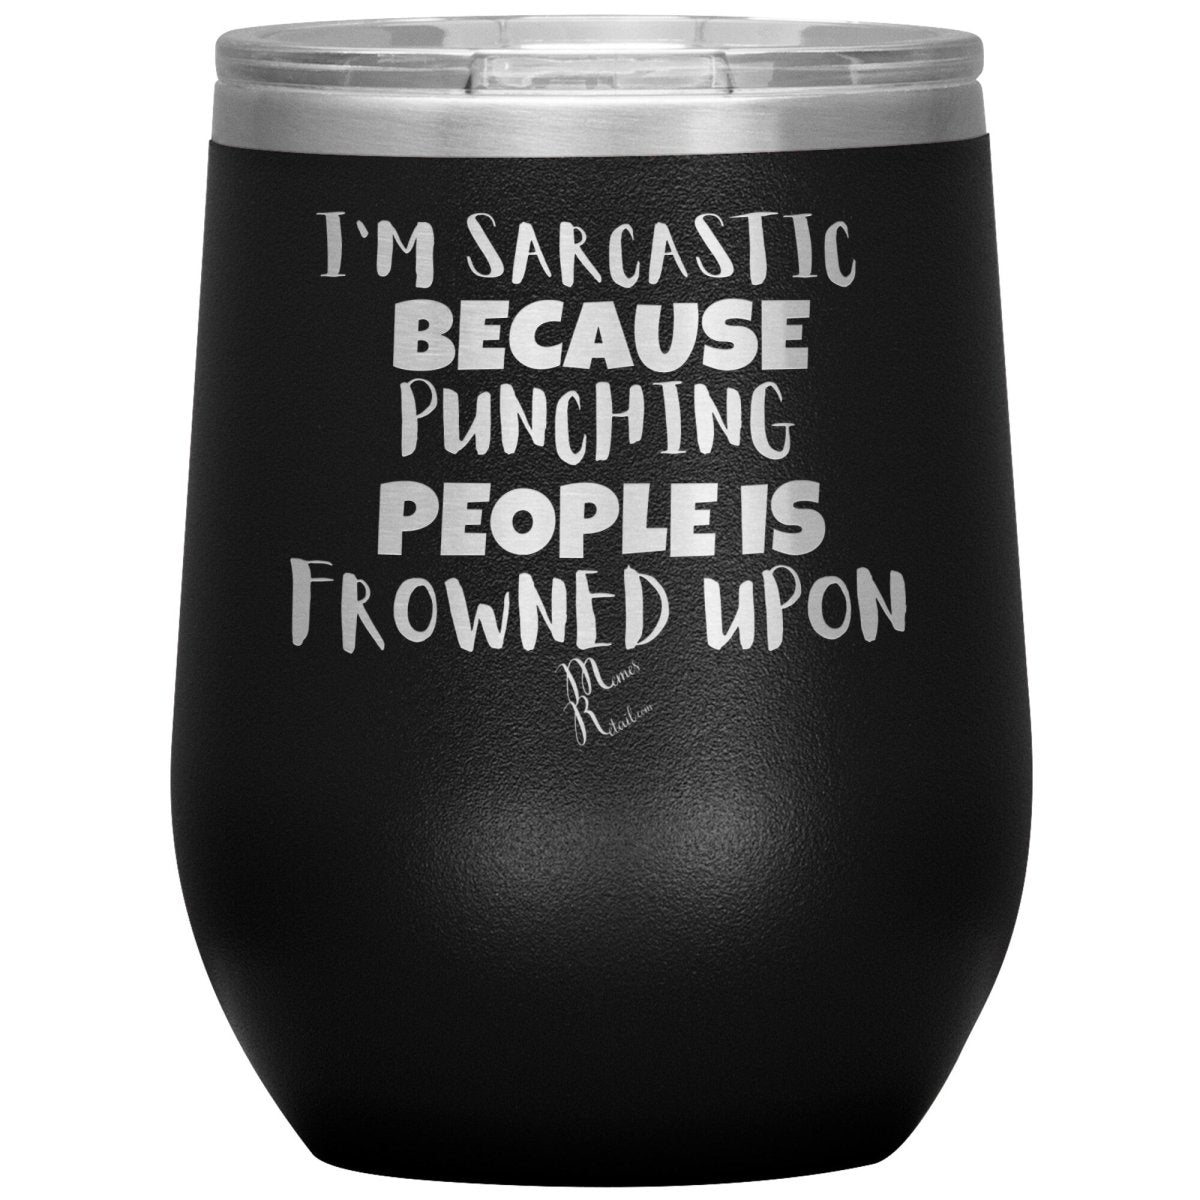 I'm Sarcastic Because Punching People is Frowned Upon Tumblers, 12oz Wine Insulated Tumbler / Black - MemesRetail.com